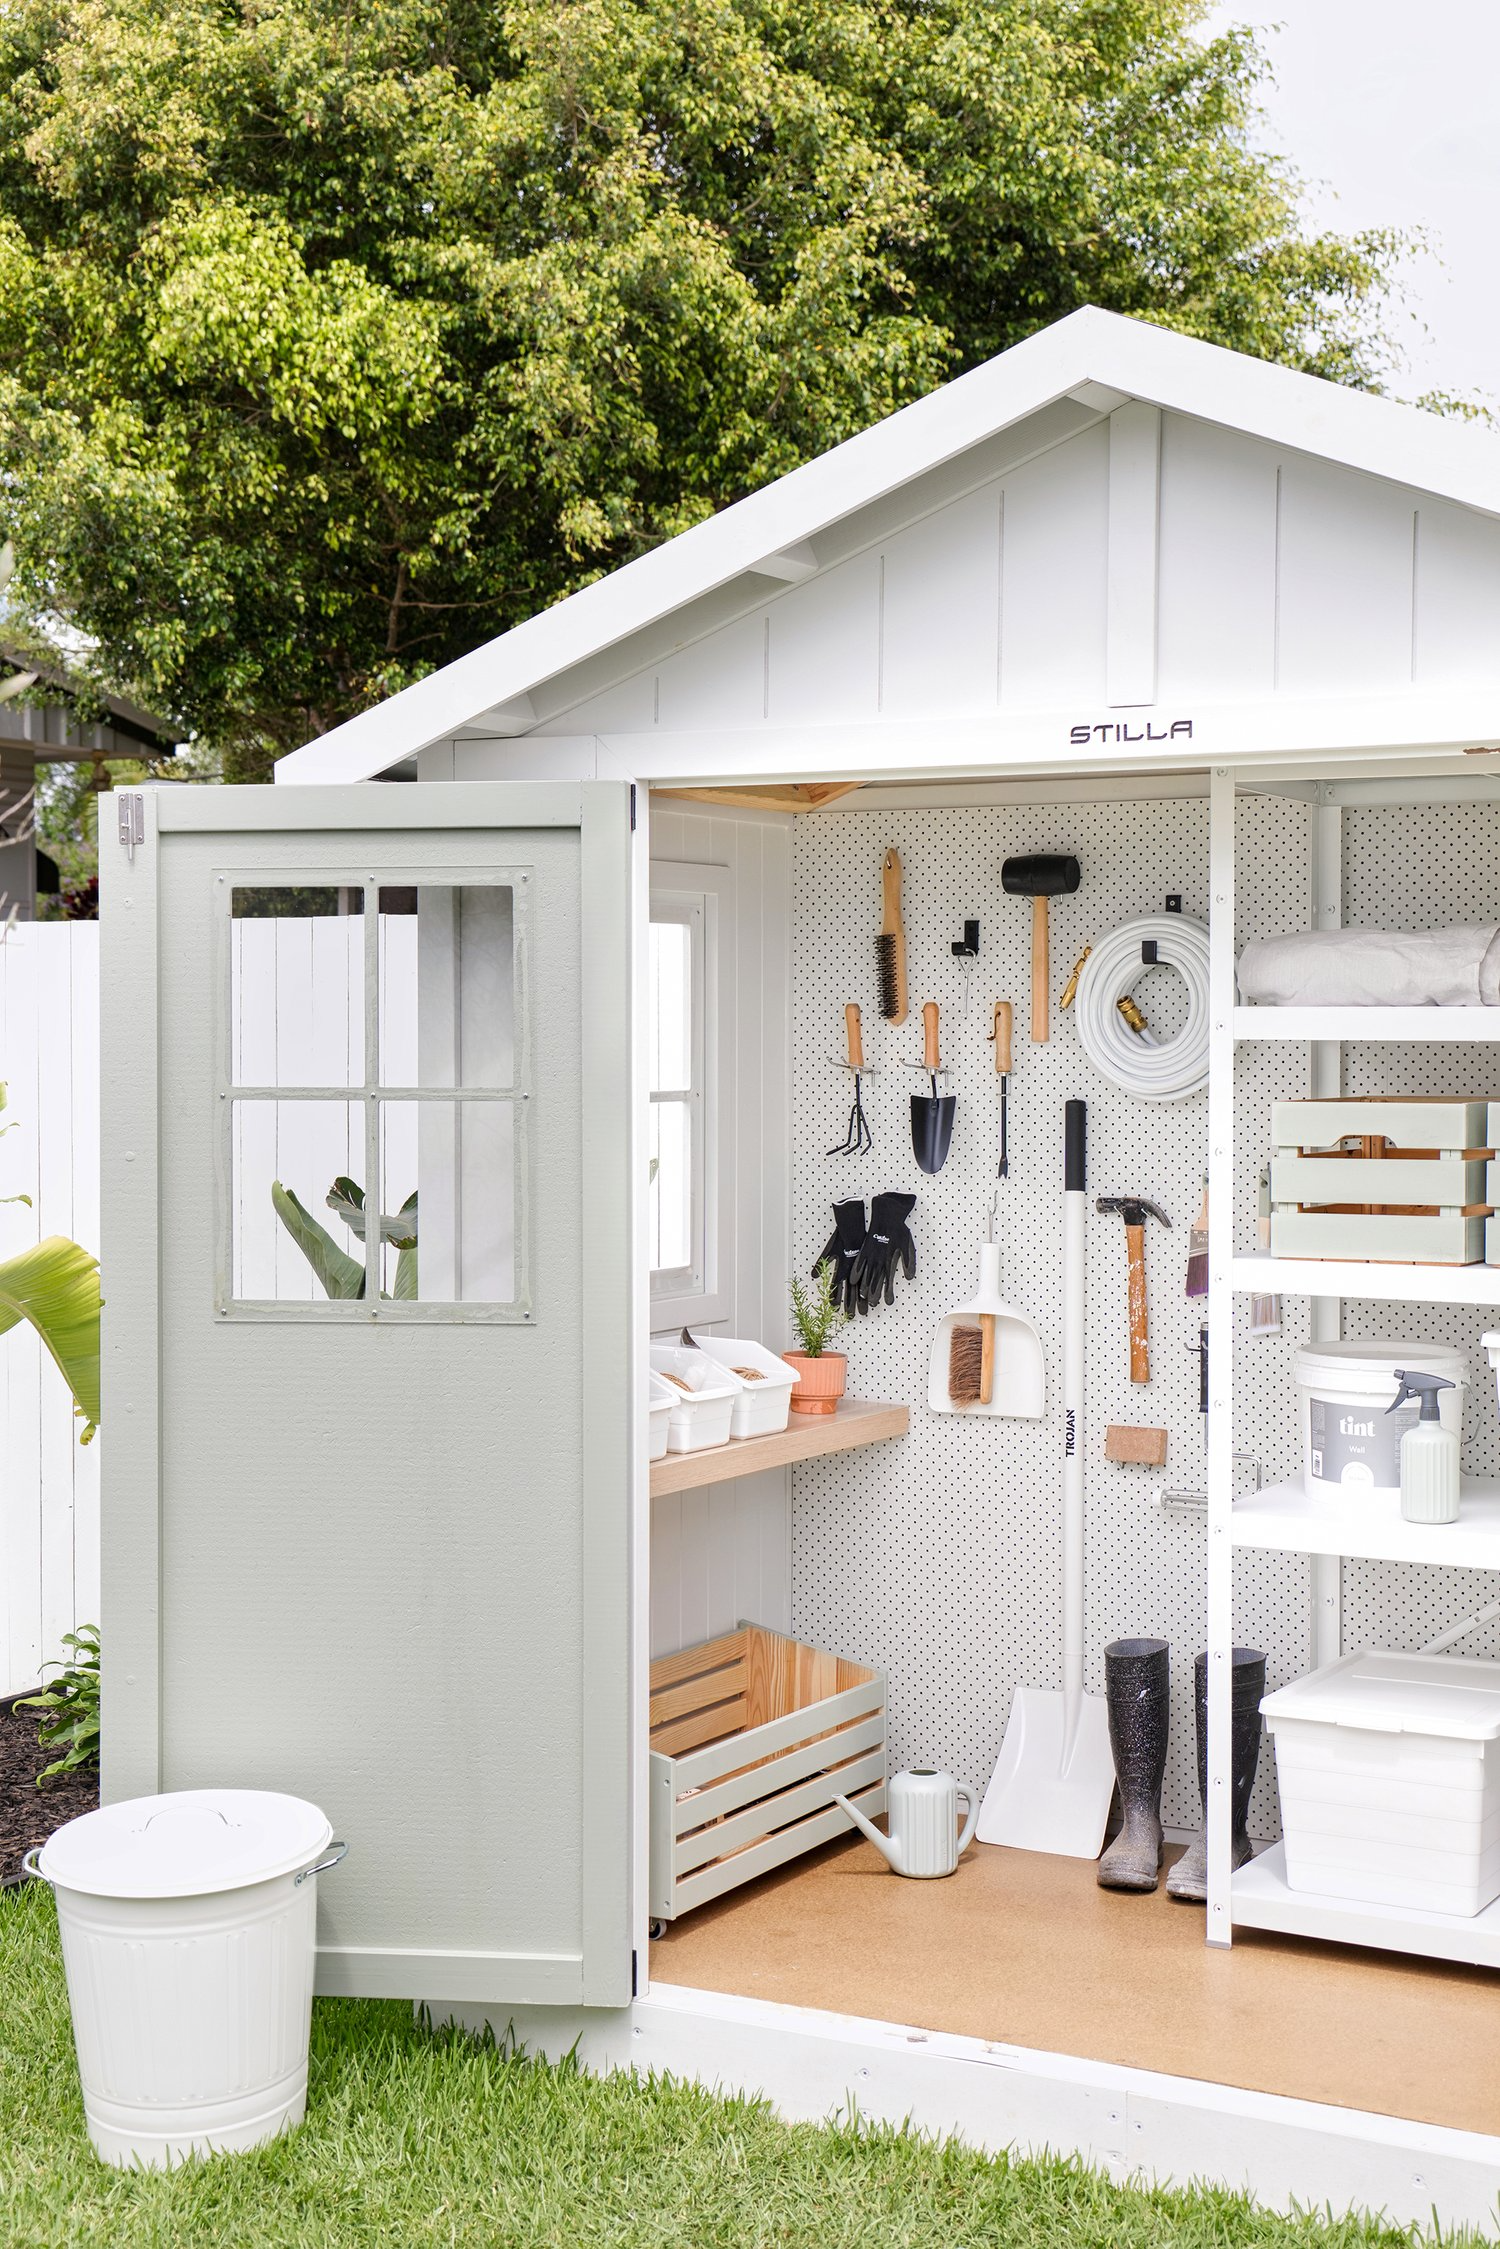 The Benefits of Having a Garden Storage Shed